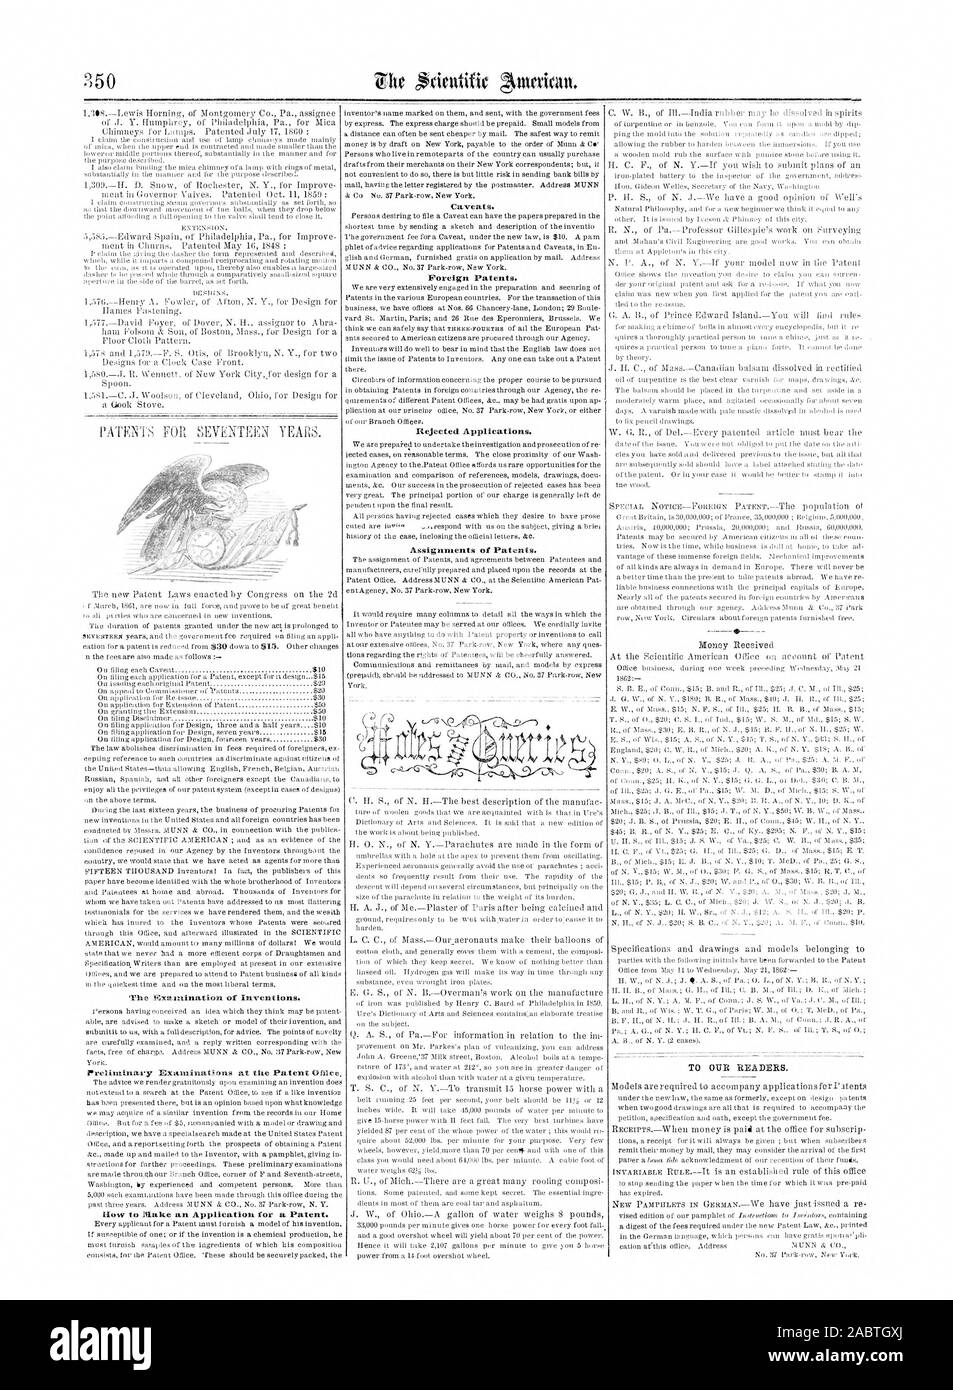 Foreign Patents. Rejected Applications. Assignments of Patents., scientific american, 1862-05-31 Stock Photo